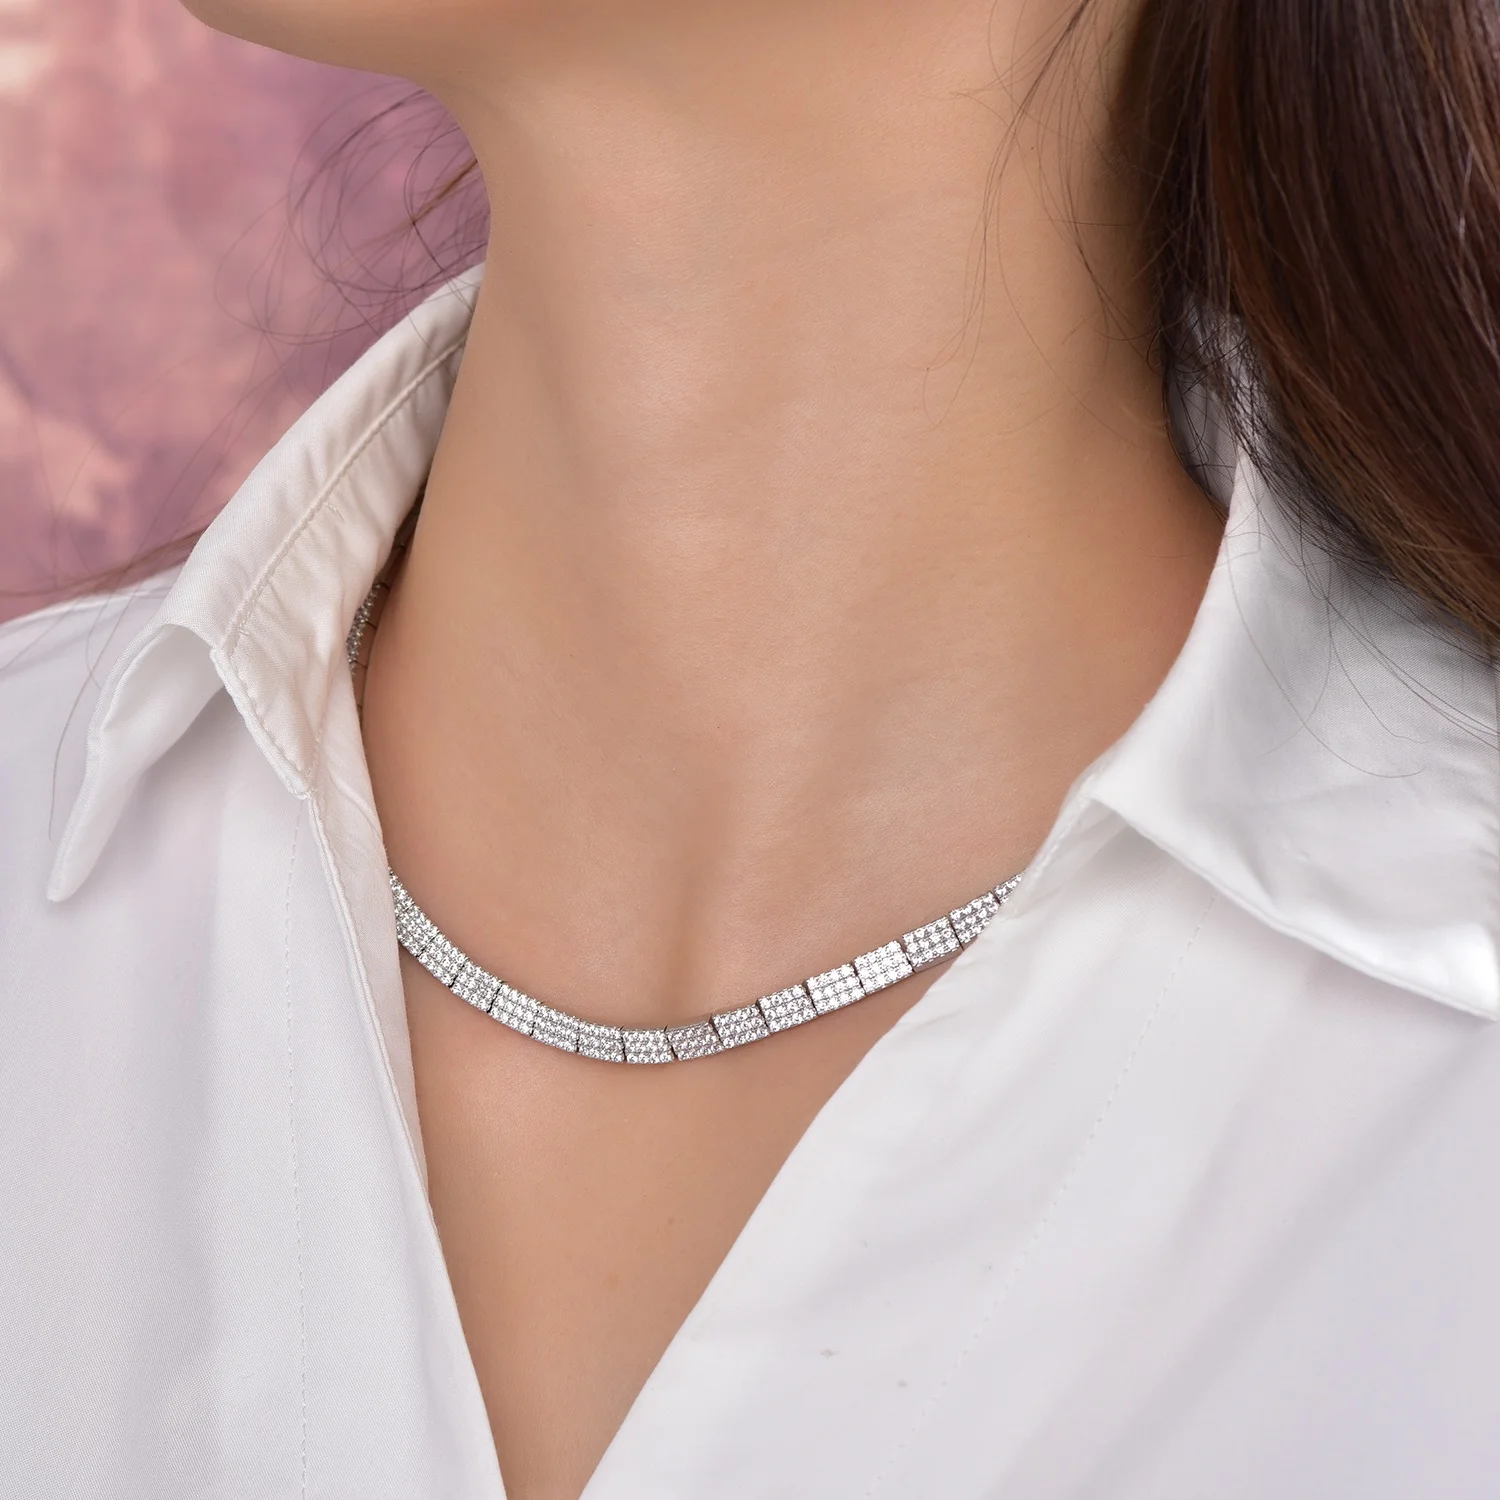 tennis chain necklace for women moissanite tennis chain Necklace 925 sterling silver tennis necklace